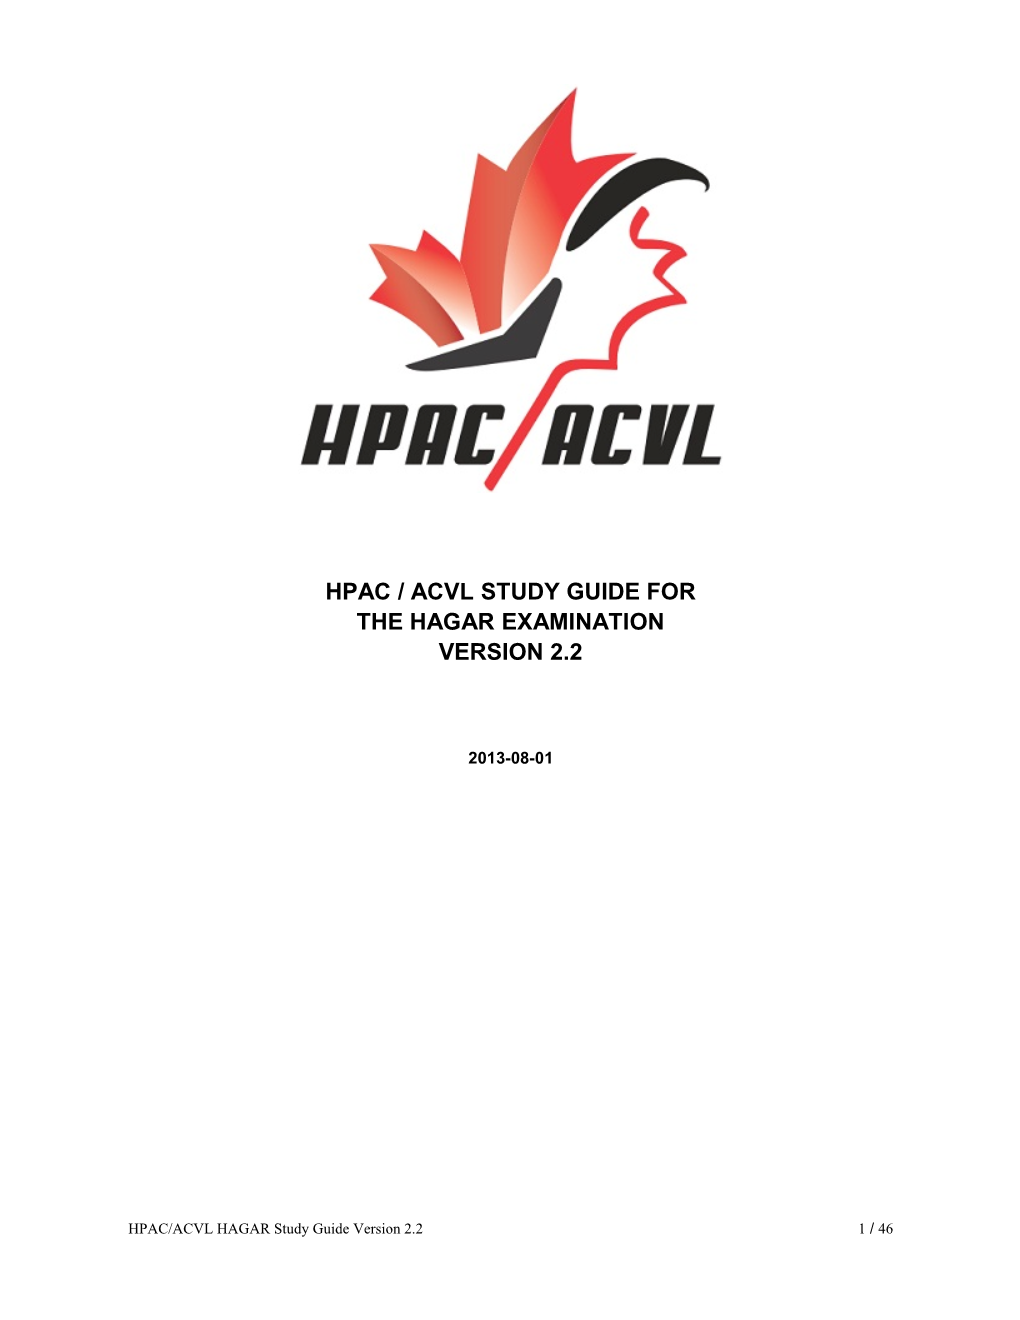 Hpac / Acvl Study Guide for the Hagar Examination Version 2.2